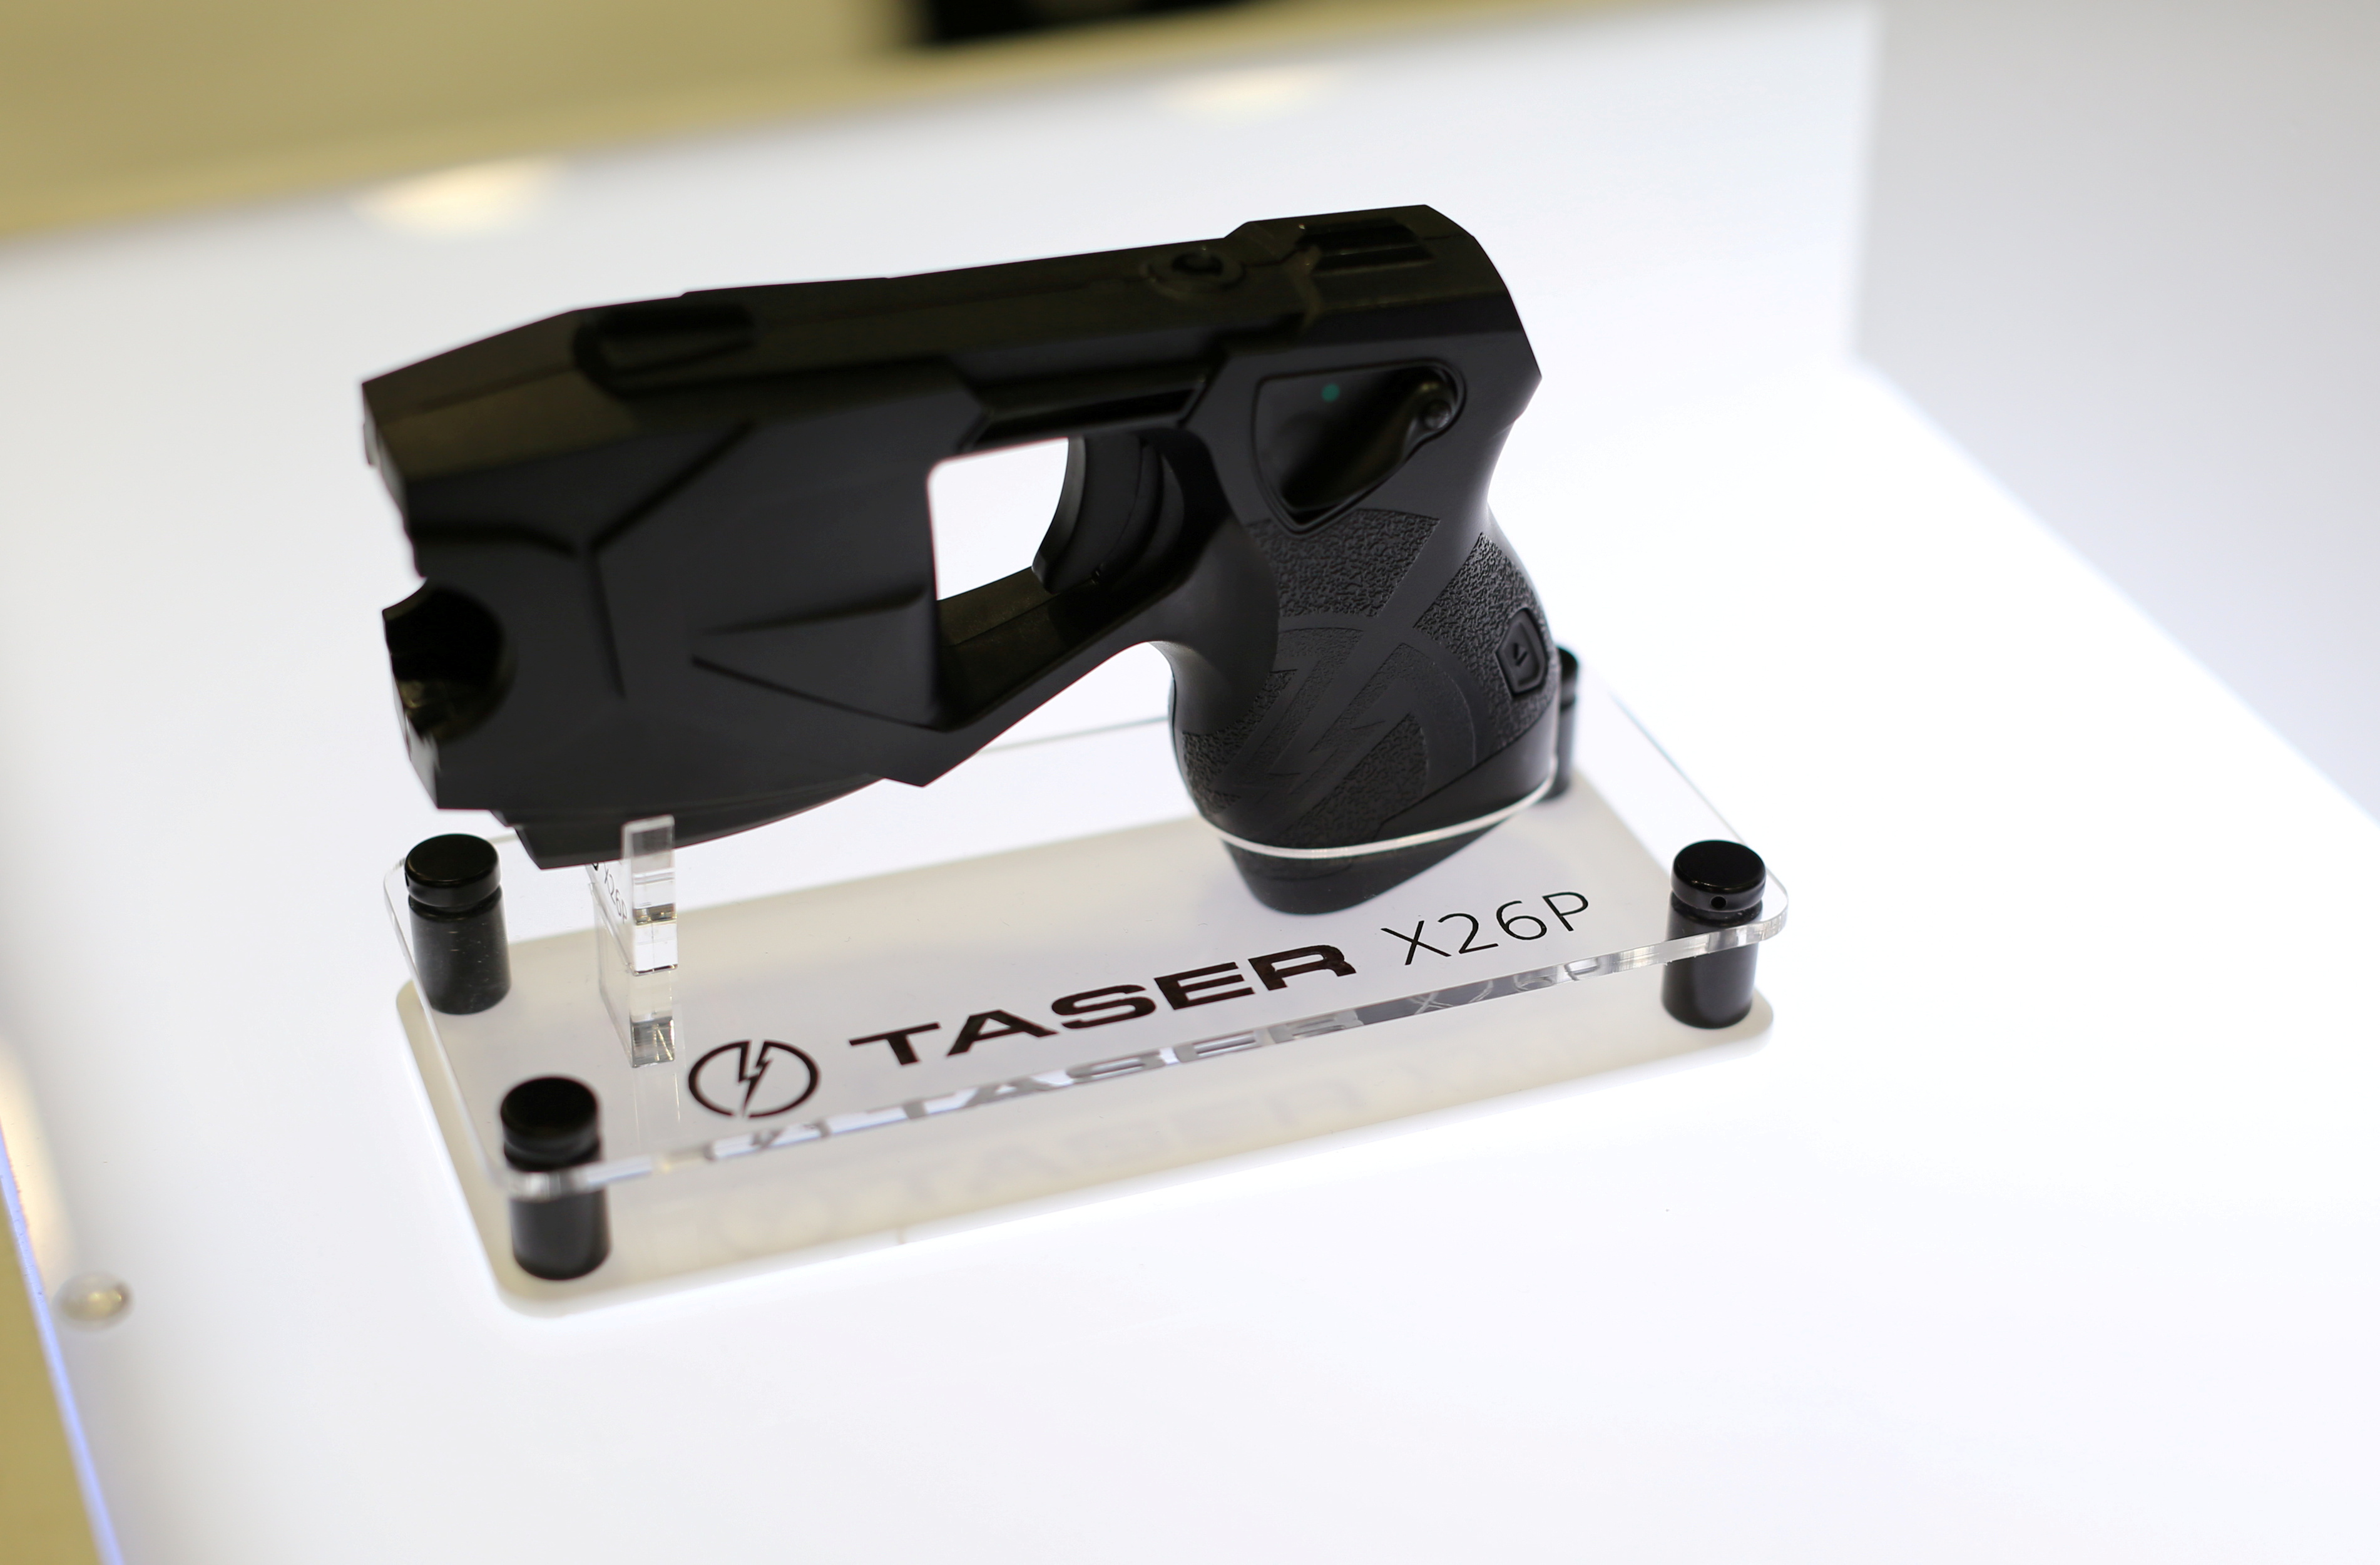 An X26P Taser gun is shown on display at the Taser booth during the International Association of Chiefs of Police conference in San Diego